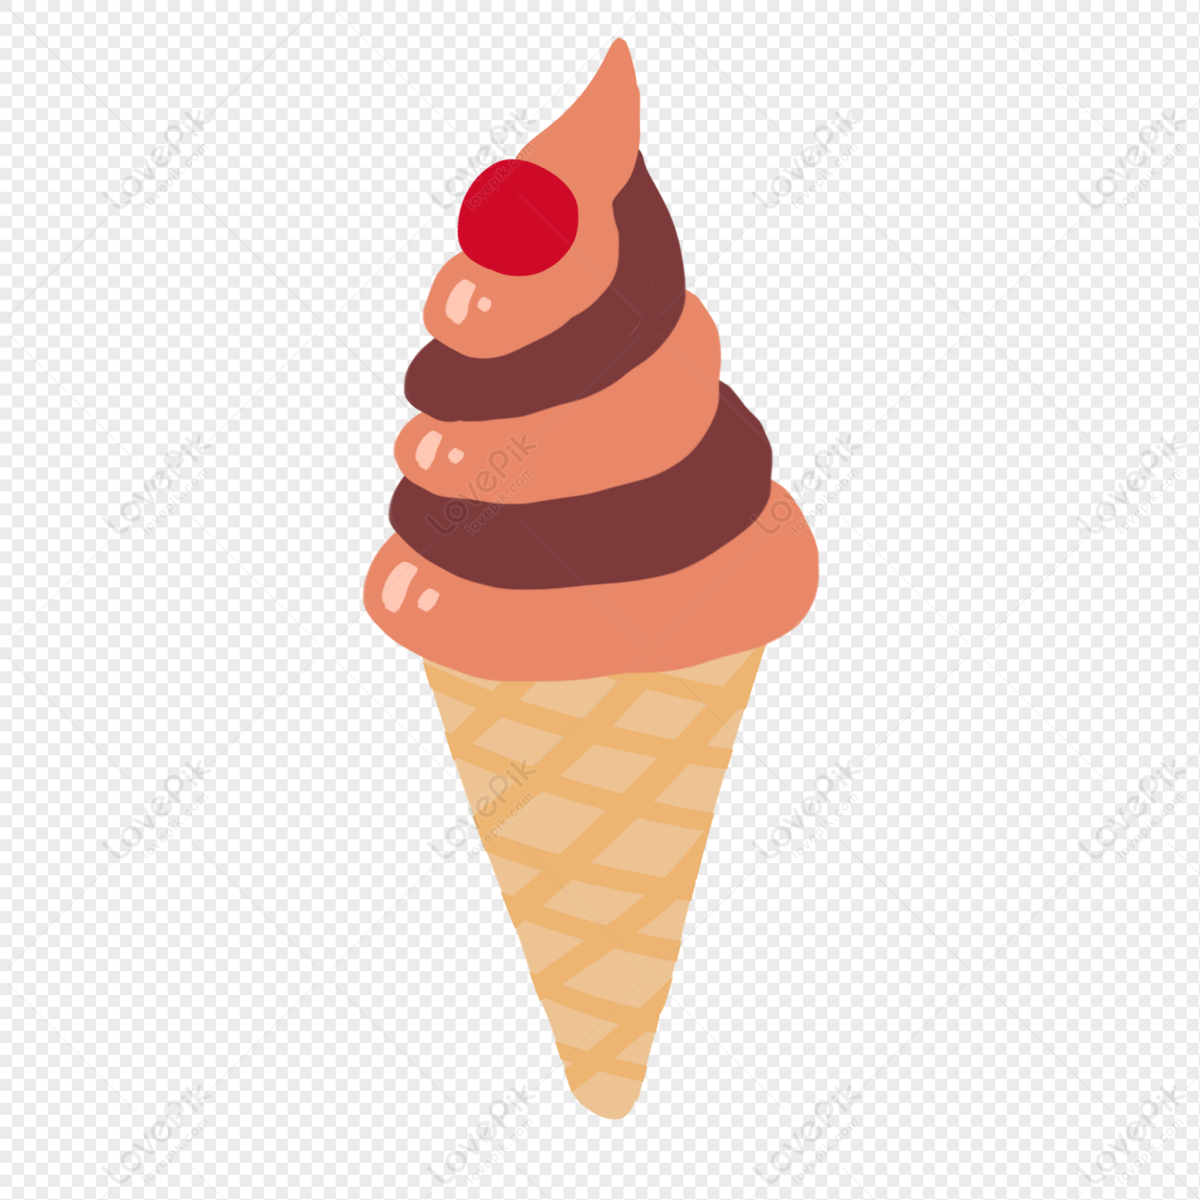 Cartoon Ice Cream Elements PNG Transparent And Clipart Image For Free  Download - Lovepik | 401235956